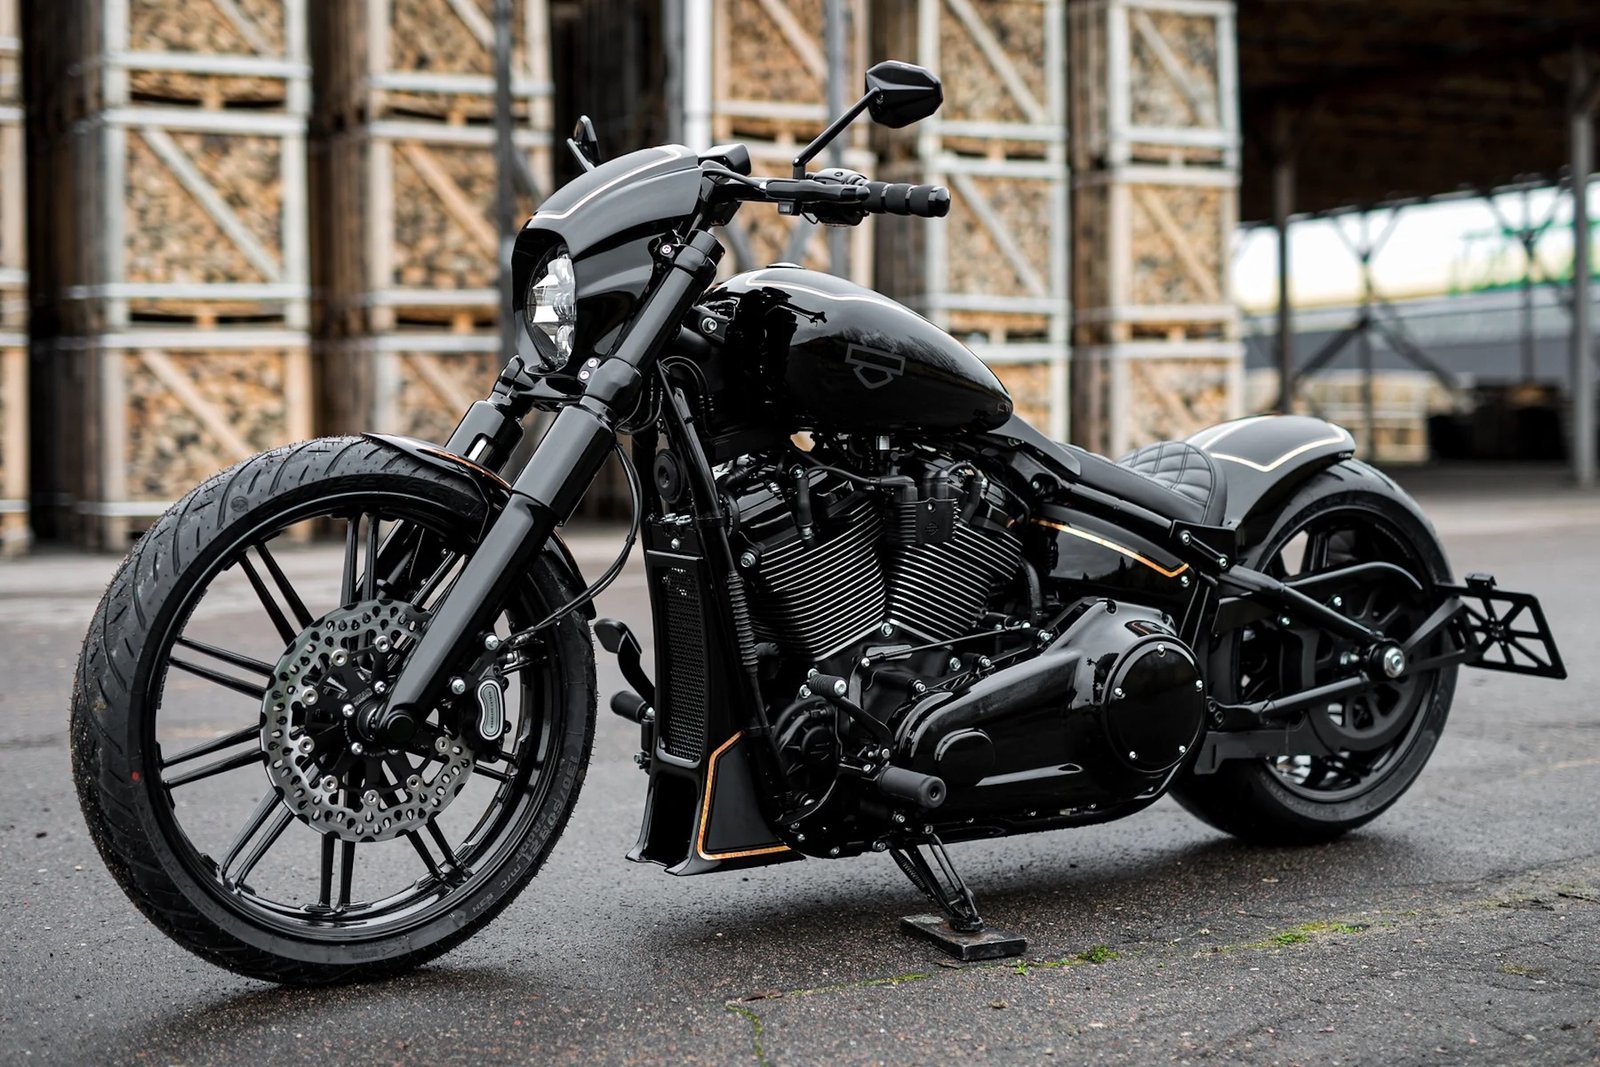 The Harley Davidson Sport Glide is a versatile bike that's designed for both touring and commuting